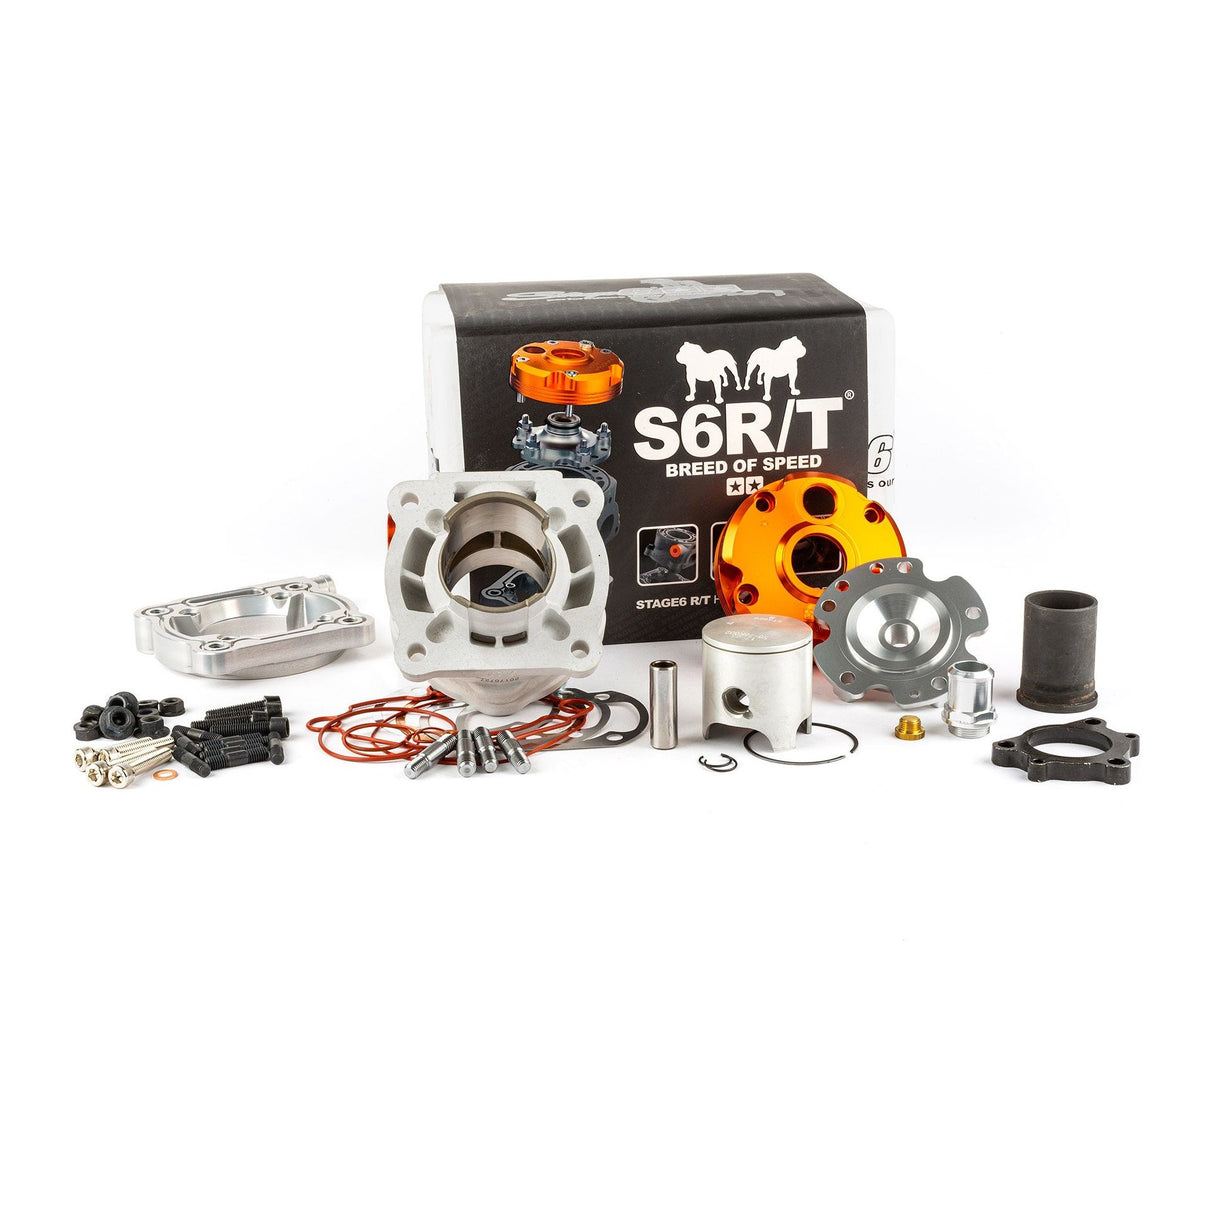 Stage6 R/T 70cc Cylinder Kit